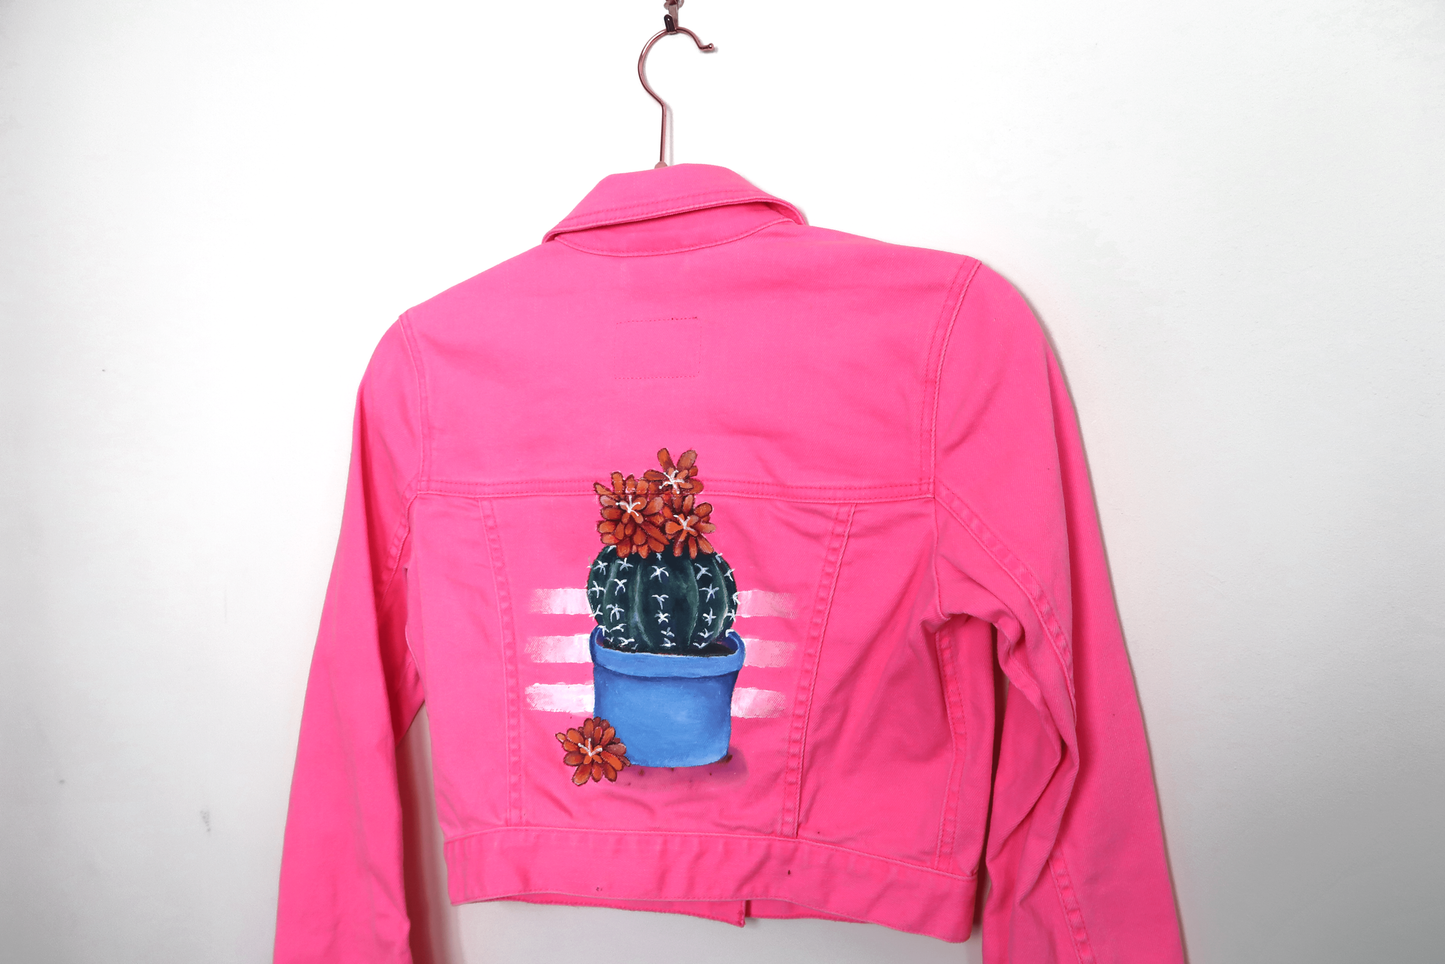 Neon Pink Cactus Denim Jacket - Hand Painted - UK Size Small